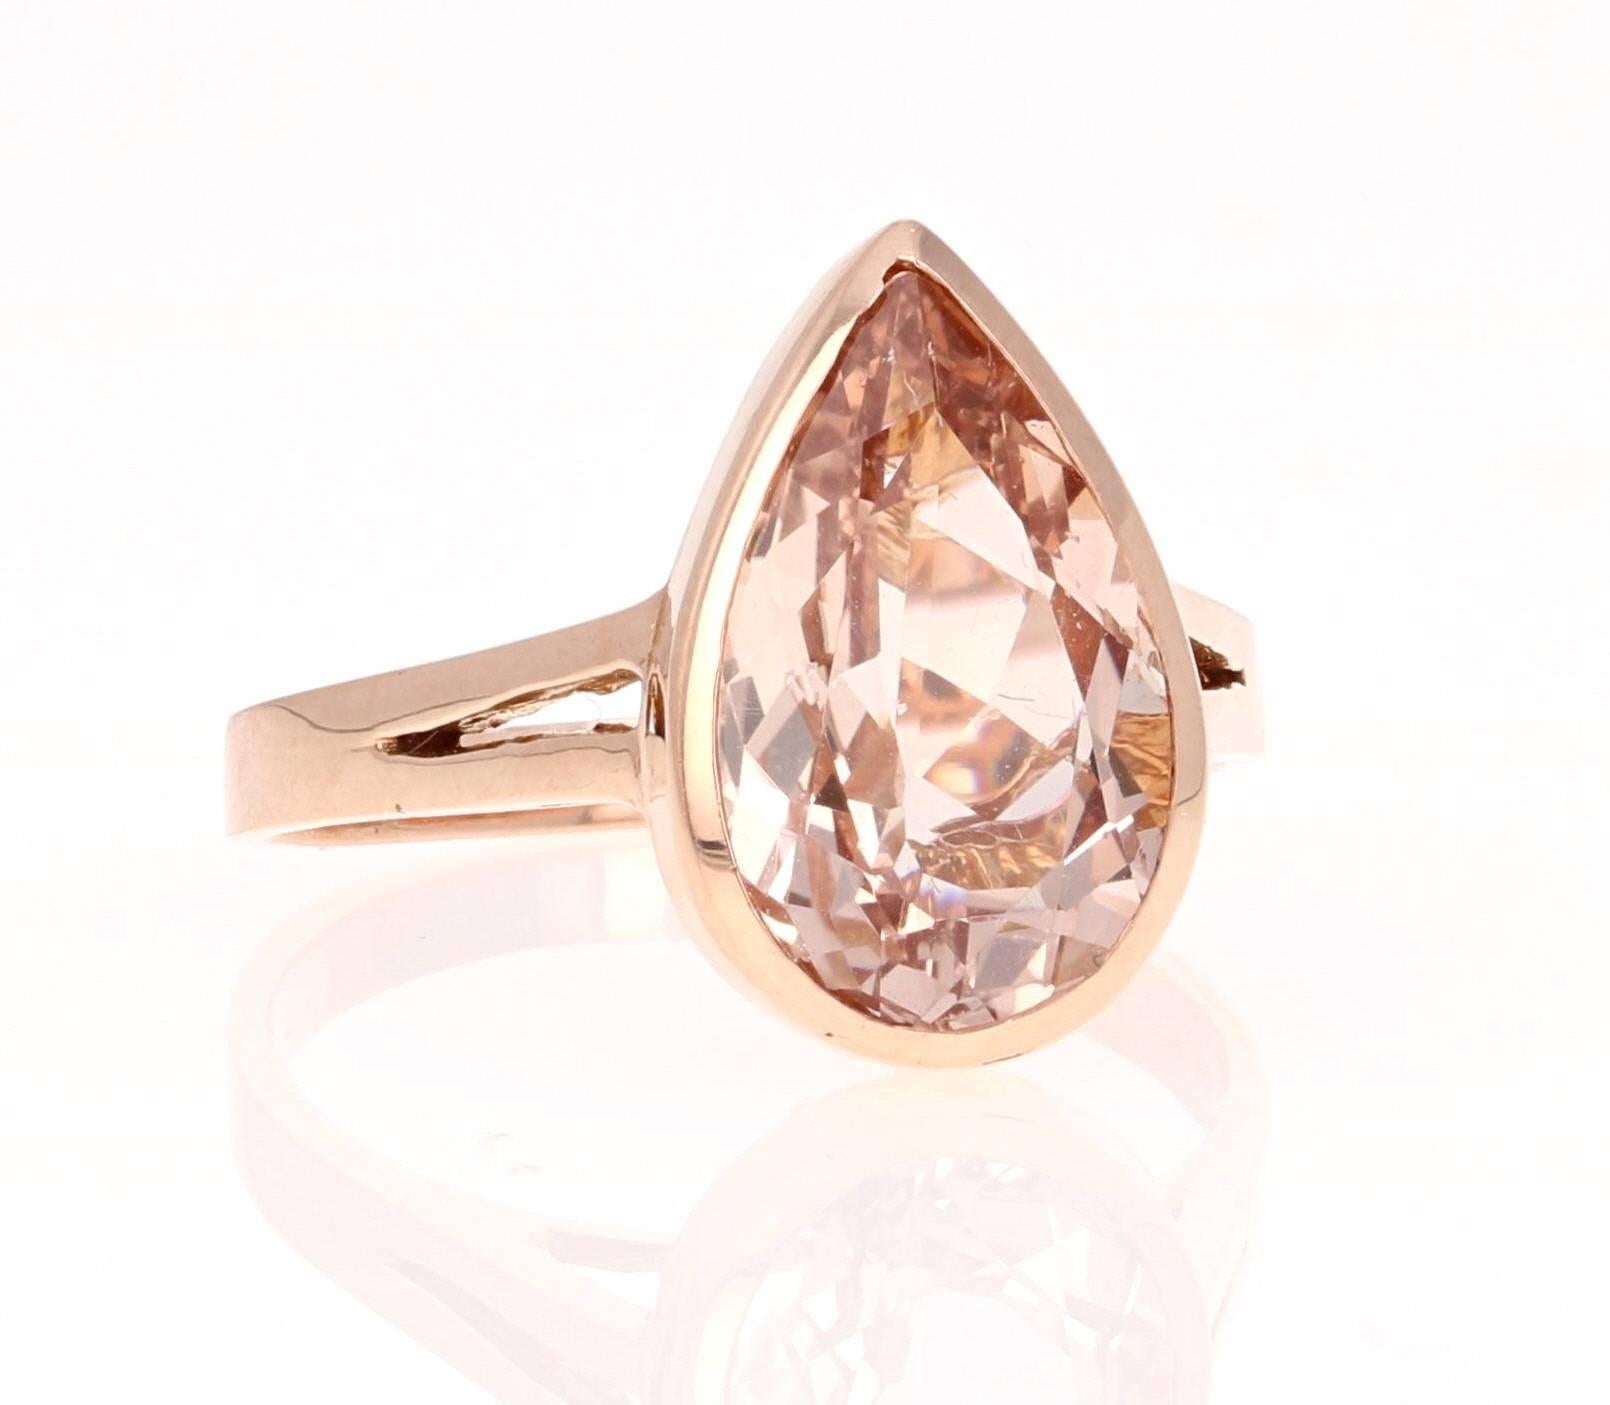 This beautiful Morganite Ring has 3.65 Carat Pear Cut Morganite and is delicately set in 14K Rose Gold.
It is a simple yet stunning ring that shows off the beautiful Morganite in a very unique way. It is a size 7 1/4 which can be re-sized if needed,